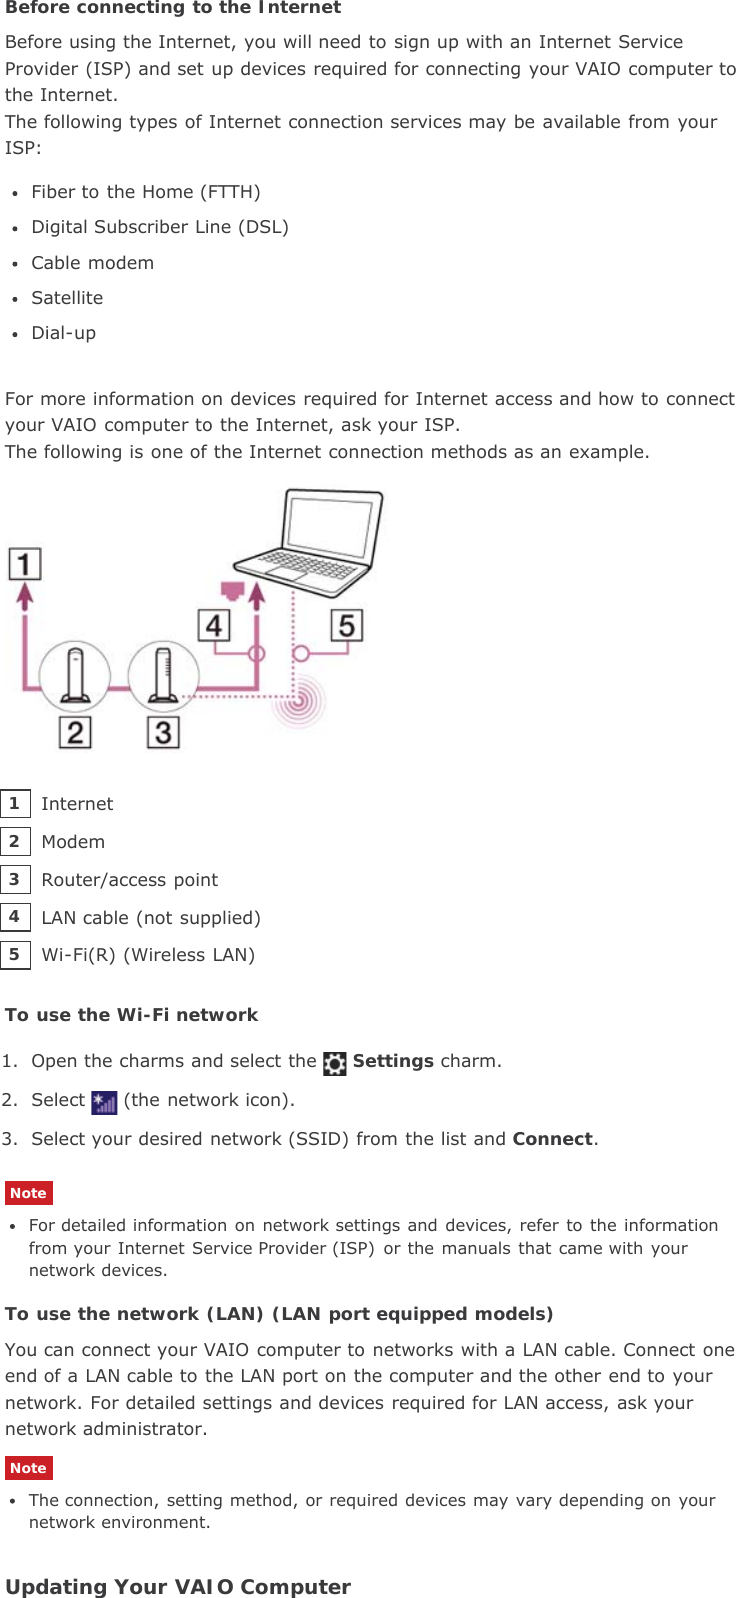 Before connecting to the InternetBefore using the Internet, you will need to sign up with an Internet ServiceProvider (ISP) and set up devices required for connecting your VAIO computer tothe Internet.The following types of Internet connection services may be available from yourISP:Fiber to the Home (FTTH)Digital Subscriber Line (DSL)Cable modemSatelliteDial-upFor more information on devices required for Internet access and how to connectyour VAIO computer to the Internet, ask your ISP.The following is one of the Internet connection methods as an example.To use the Wi-Fi network1. Open the charms and select the Settings charm.2. Select (the network icon).3. Select your desired network (SSID) from the list and Connect.NoteFor detailed information on network settings and devices,  refer  to  the informationfrom your Internet Service Provider (ISP)  or the  manuals  that came with yournetwork devices.To use the network (LAN) (LAN port equipped models)You can connect your VAIO computer to networks with a LAN cable. Connect oneend of a LAN cable to the LAN port on the computer and the other end to yournetwork. For detailed settings and devices required for LAN access, ask yournetwork administrator.NoteThe connection, setting method, or required devices may  vary depending on  yournetwork environment.Updating Your VAIO ComputerInternet1Modem2Router/access point3LAN cable (not supplied)4Wi-Fi(R) (Wireless LAN)5